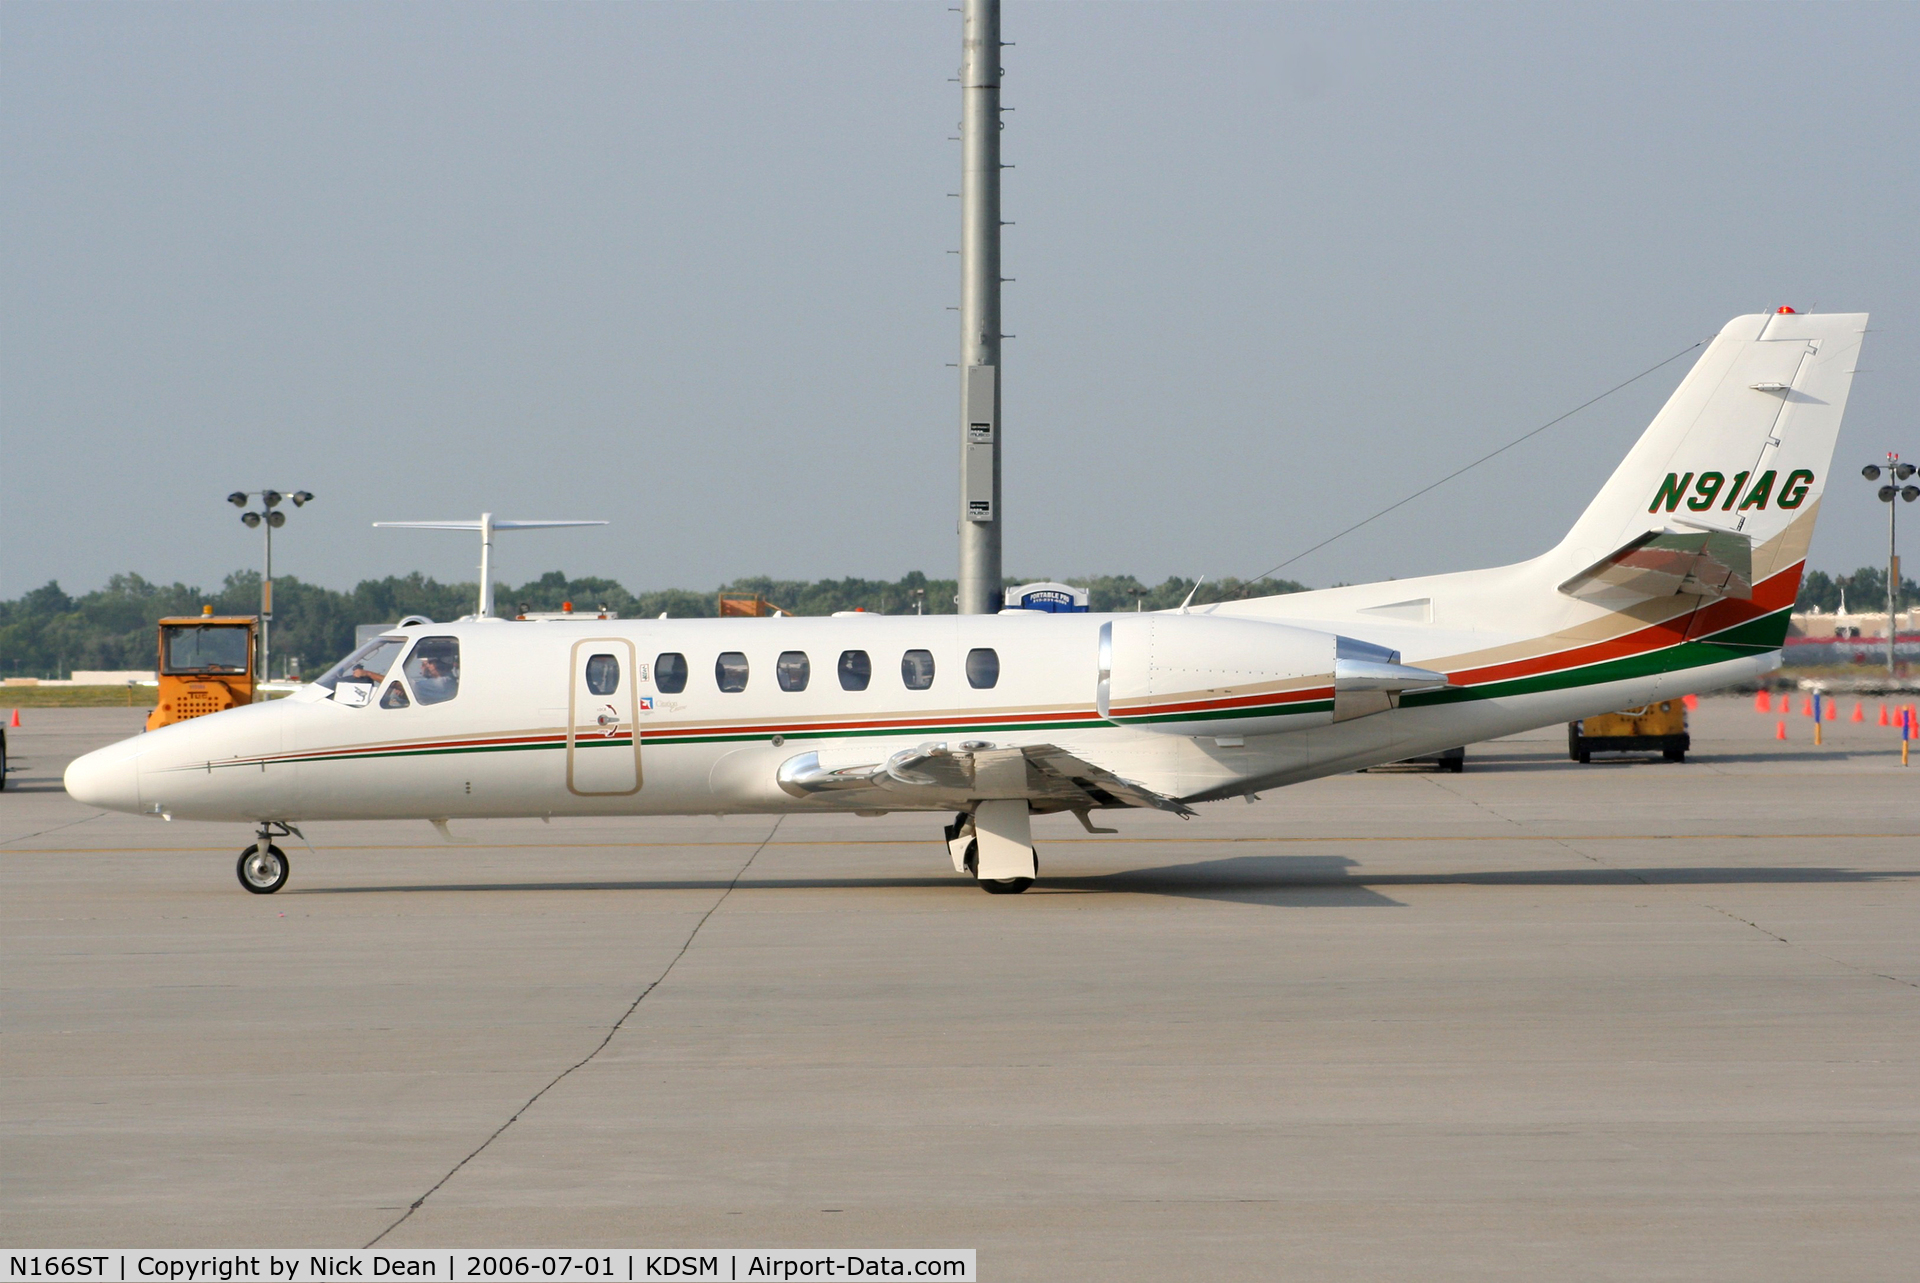 N166ST, 2002 Cessna 560 C/N 560-0606, KDSM (Seen here as N91AG this airframe is currently registered N166ST as posted)